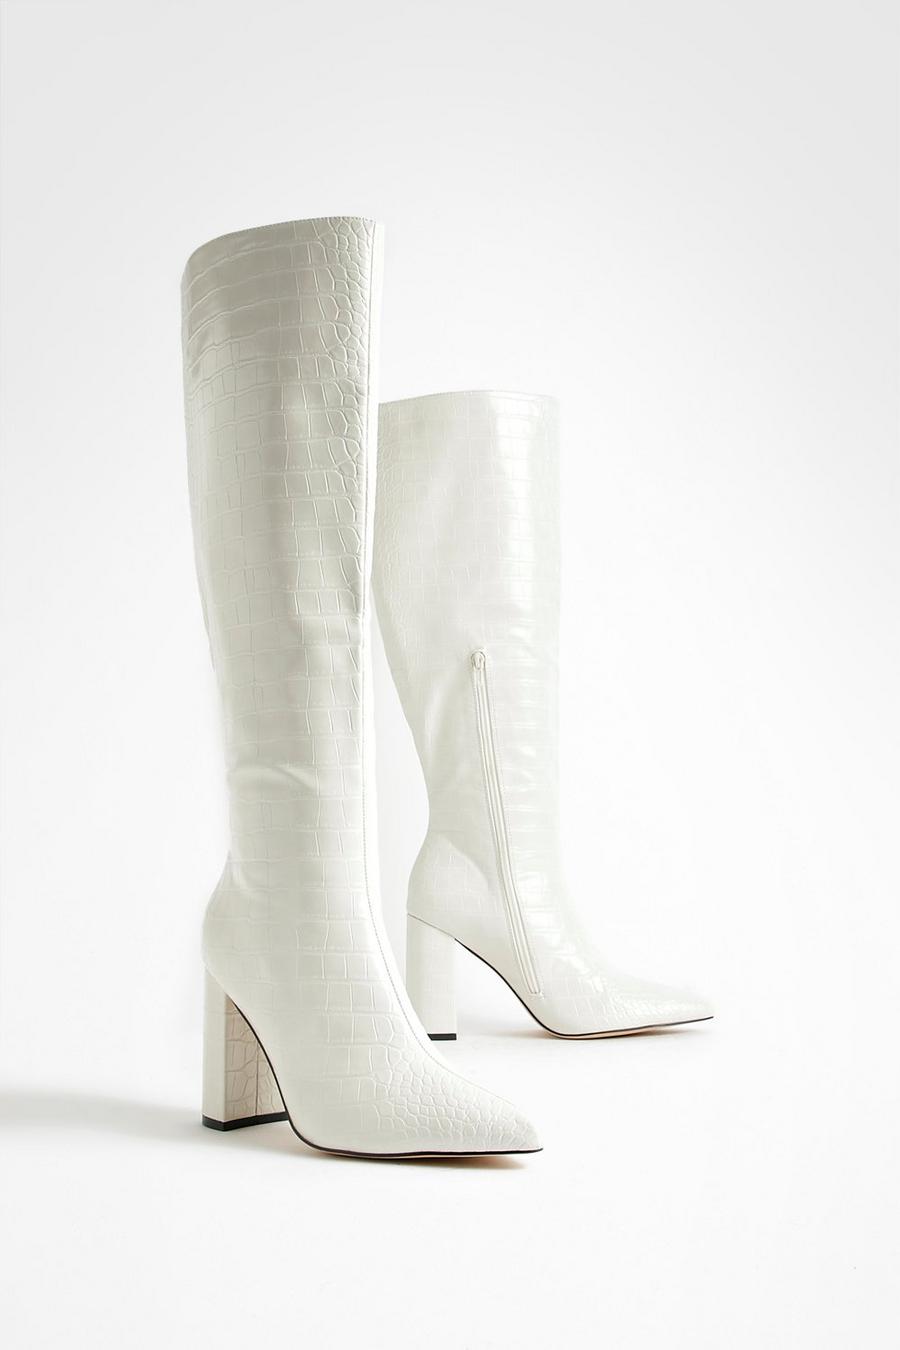 White Croc Block Heel Pointed Toe Knee High Boots      